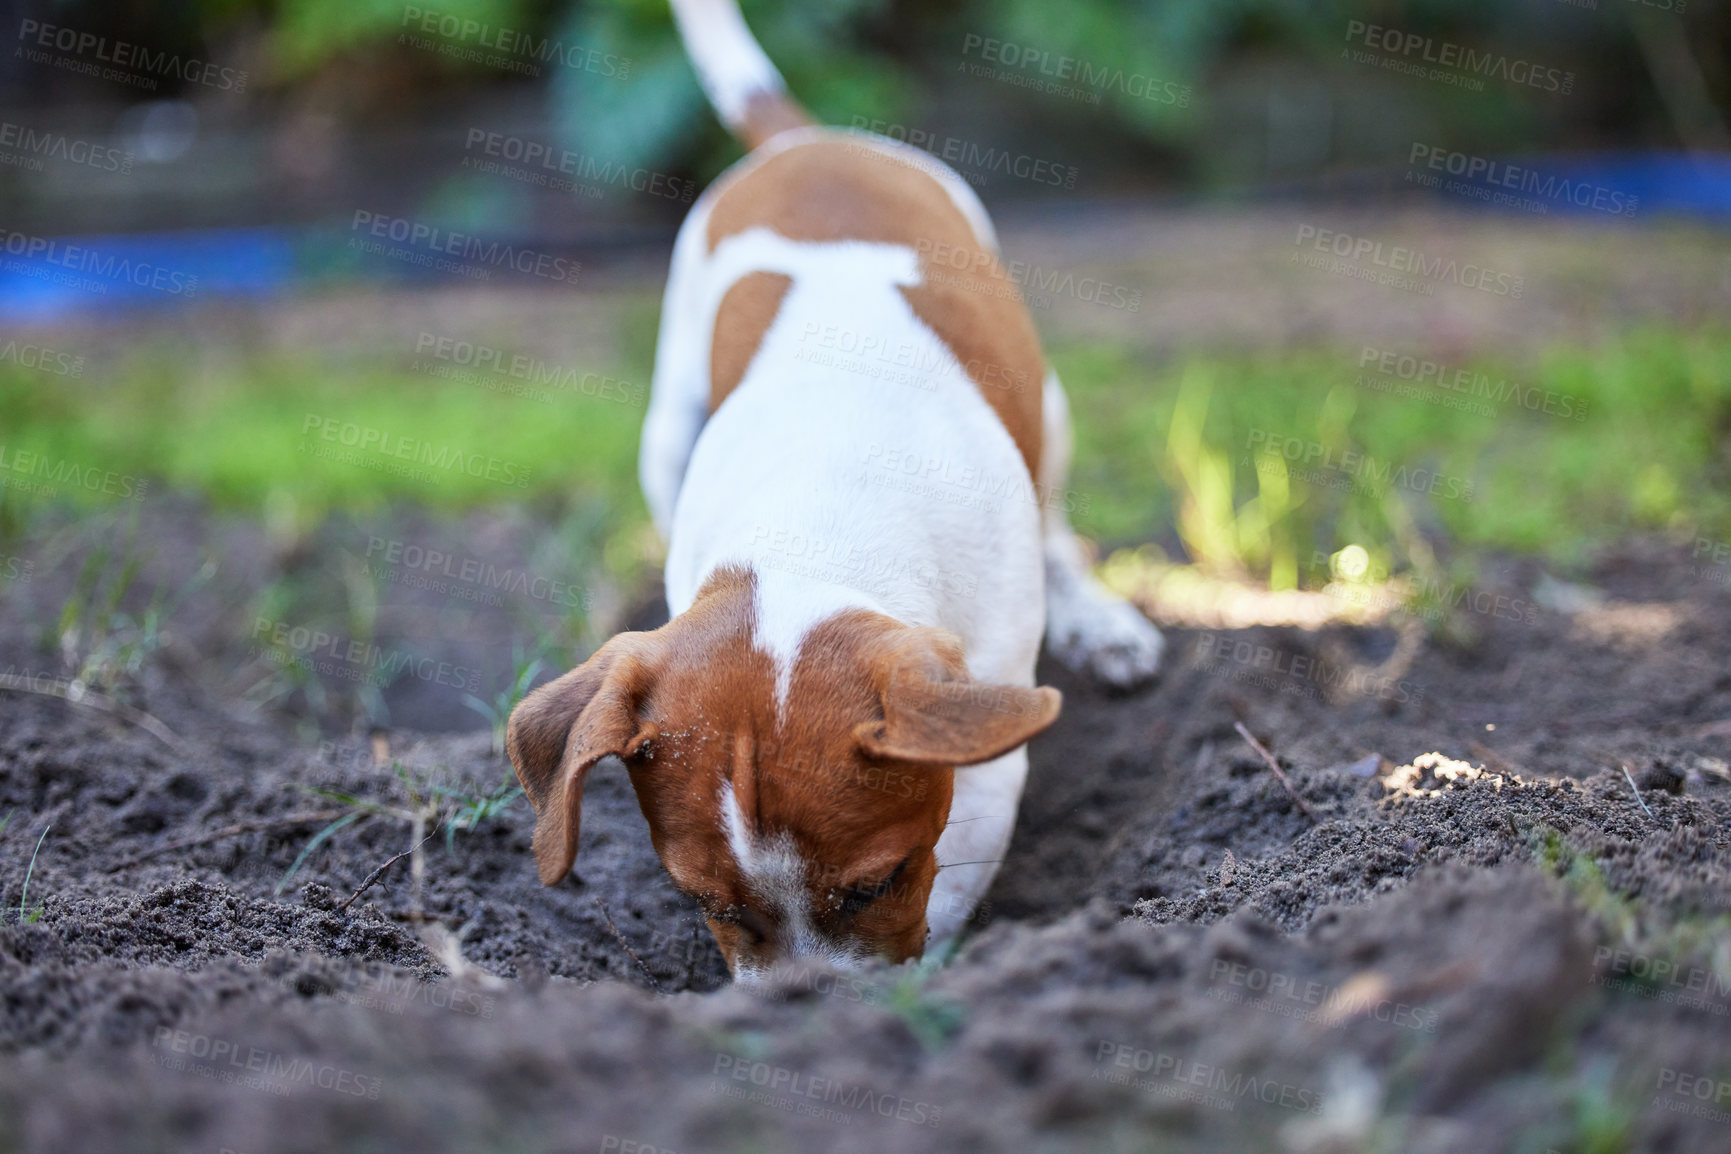 Buy stock photo Full length shot of an adorable young Jack Russell digging a hole in the ground outside